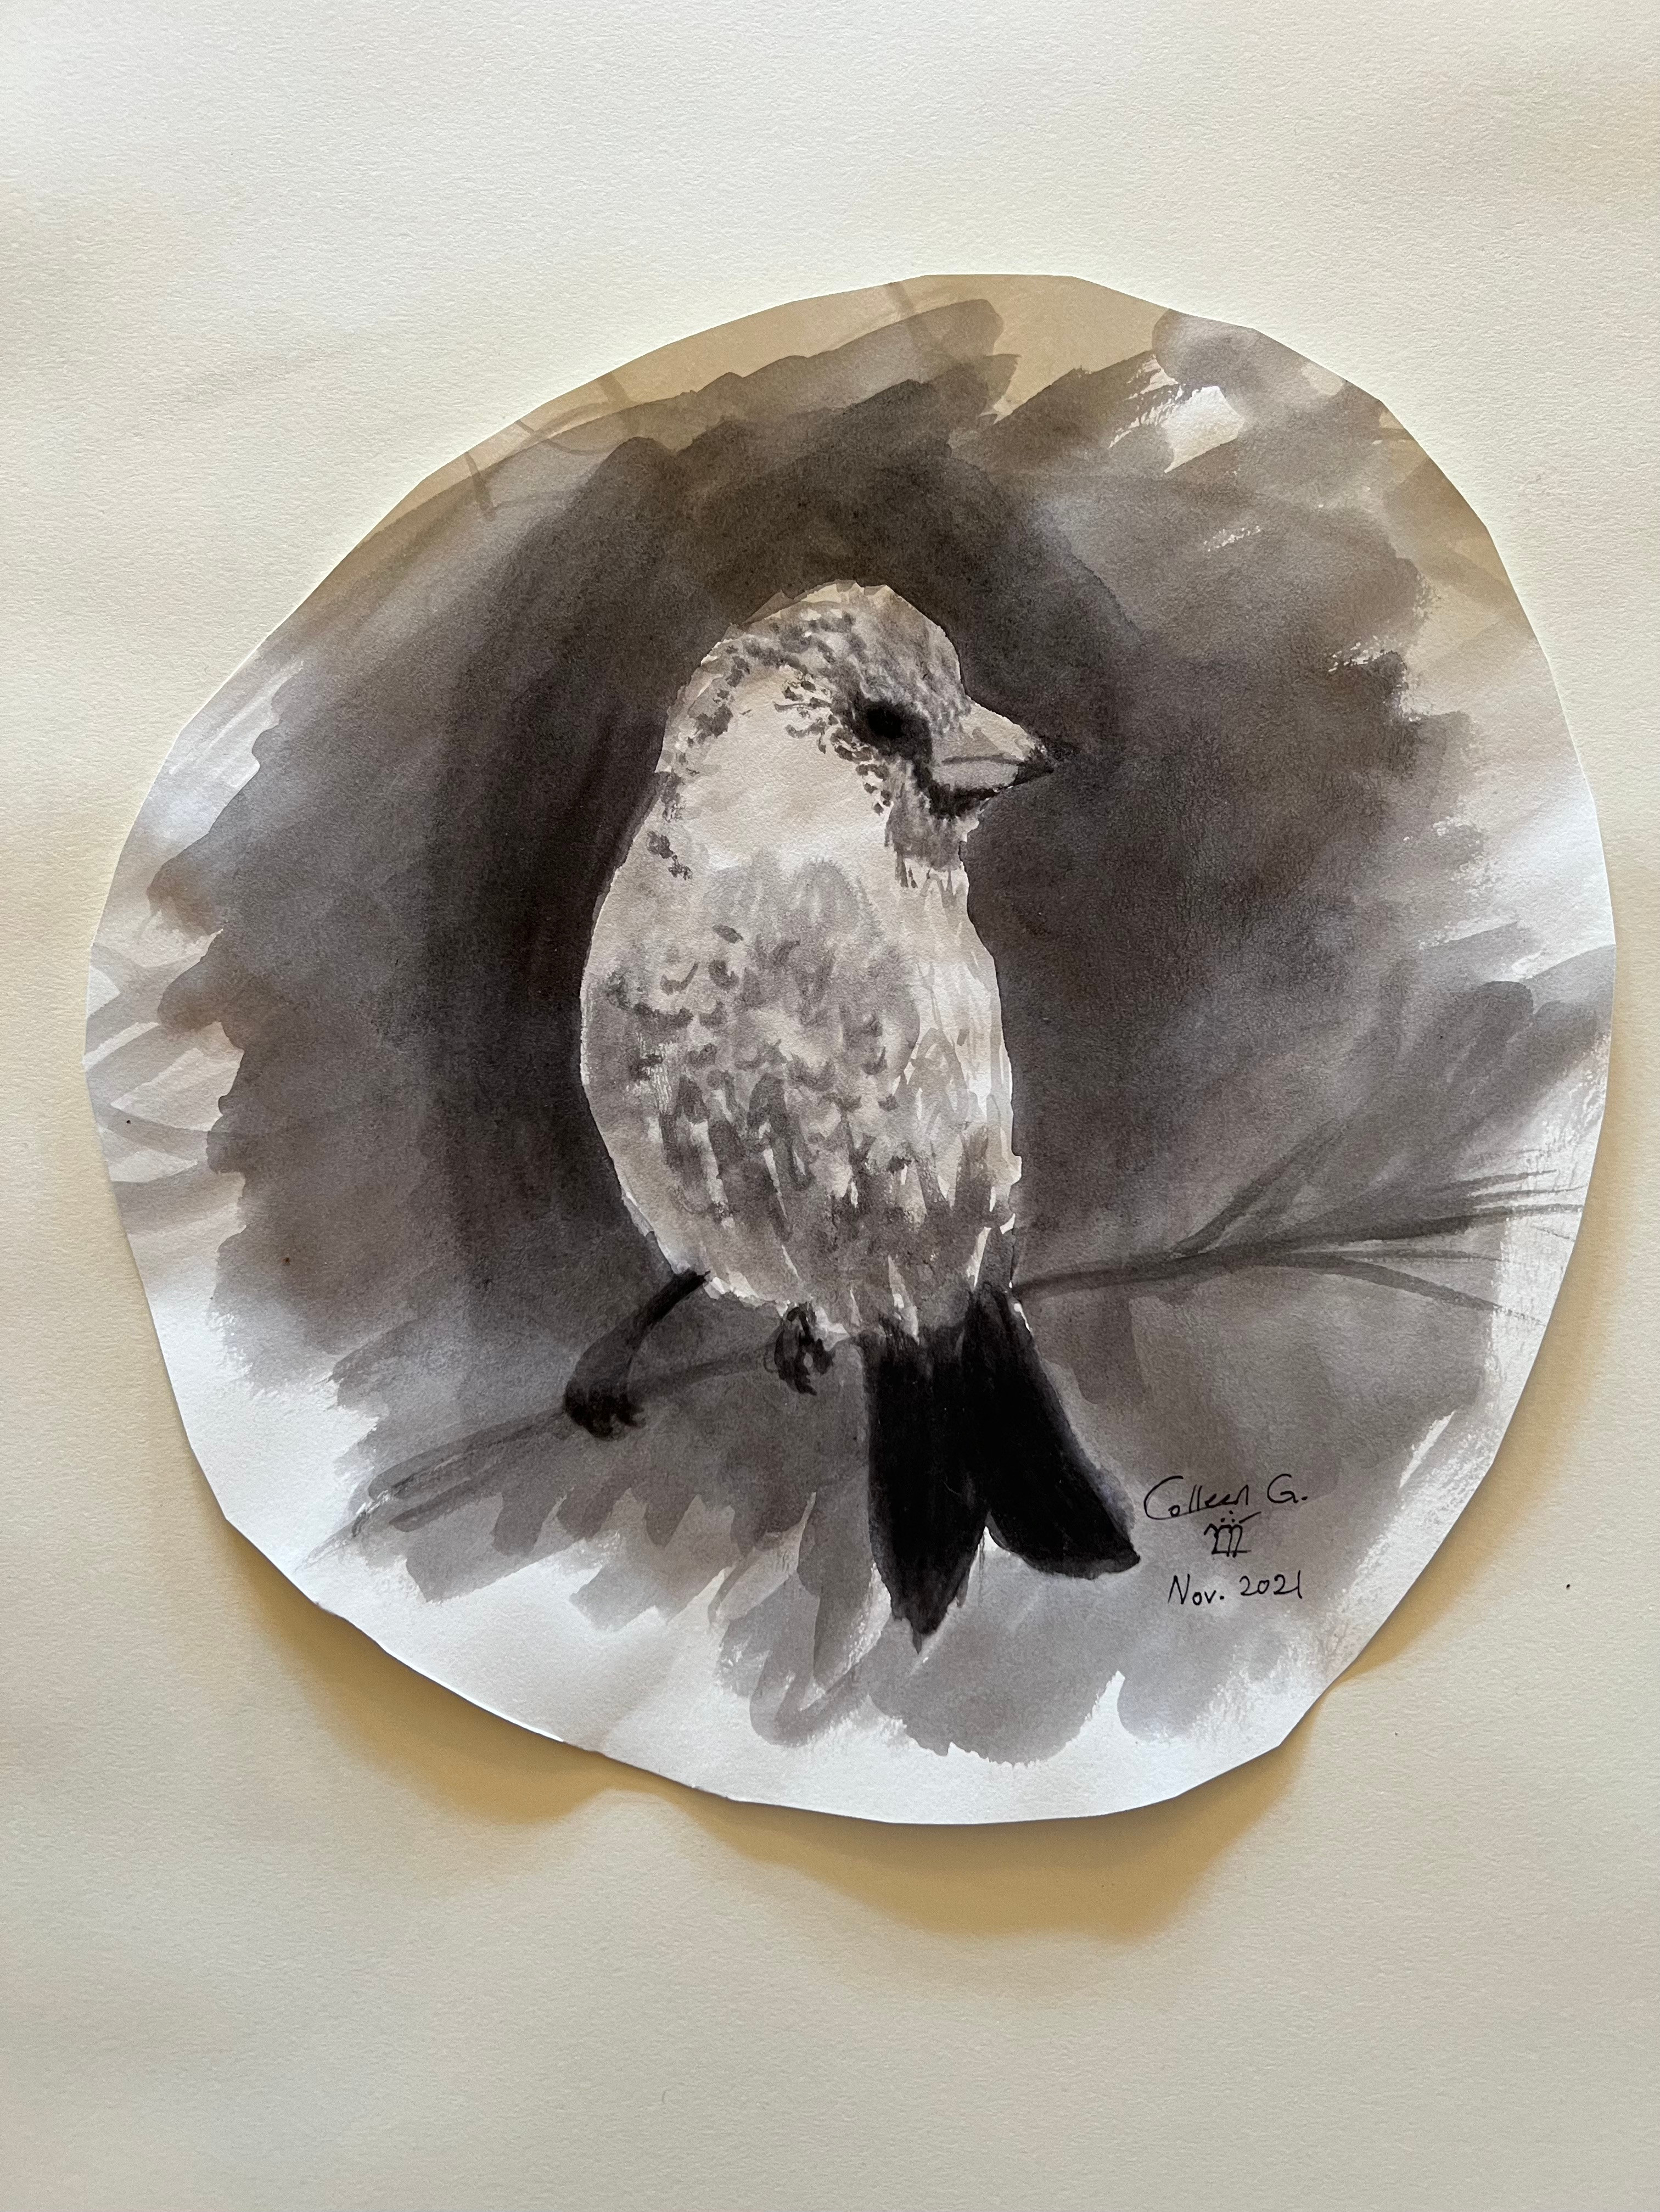 The beginning of wet media! Using only ink, I did a lot of rapid-fire drawings from photo references I got to pick myself (this is a rose finch!)
Time: 10-15 minutes.